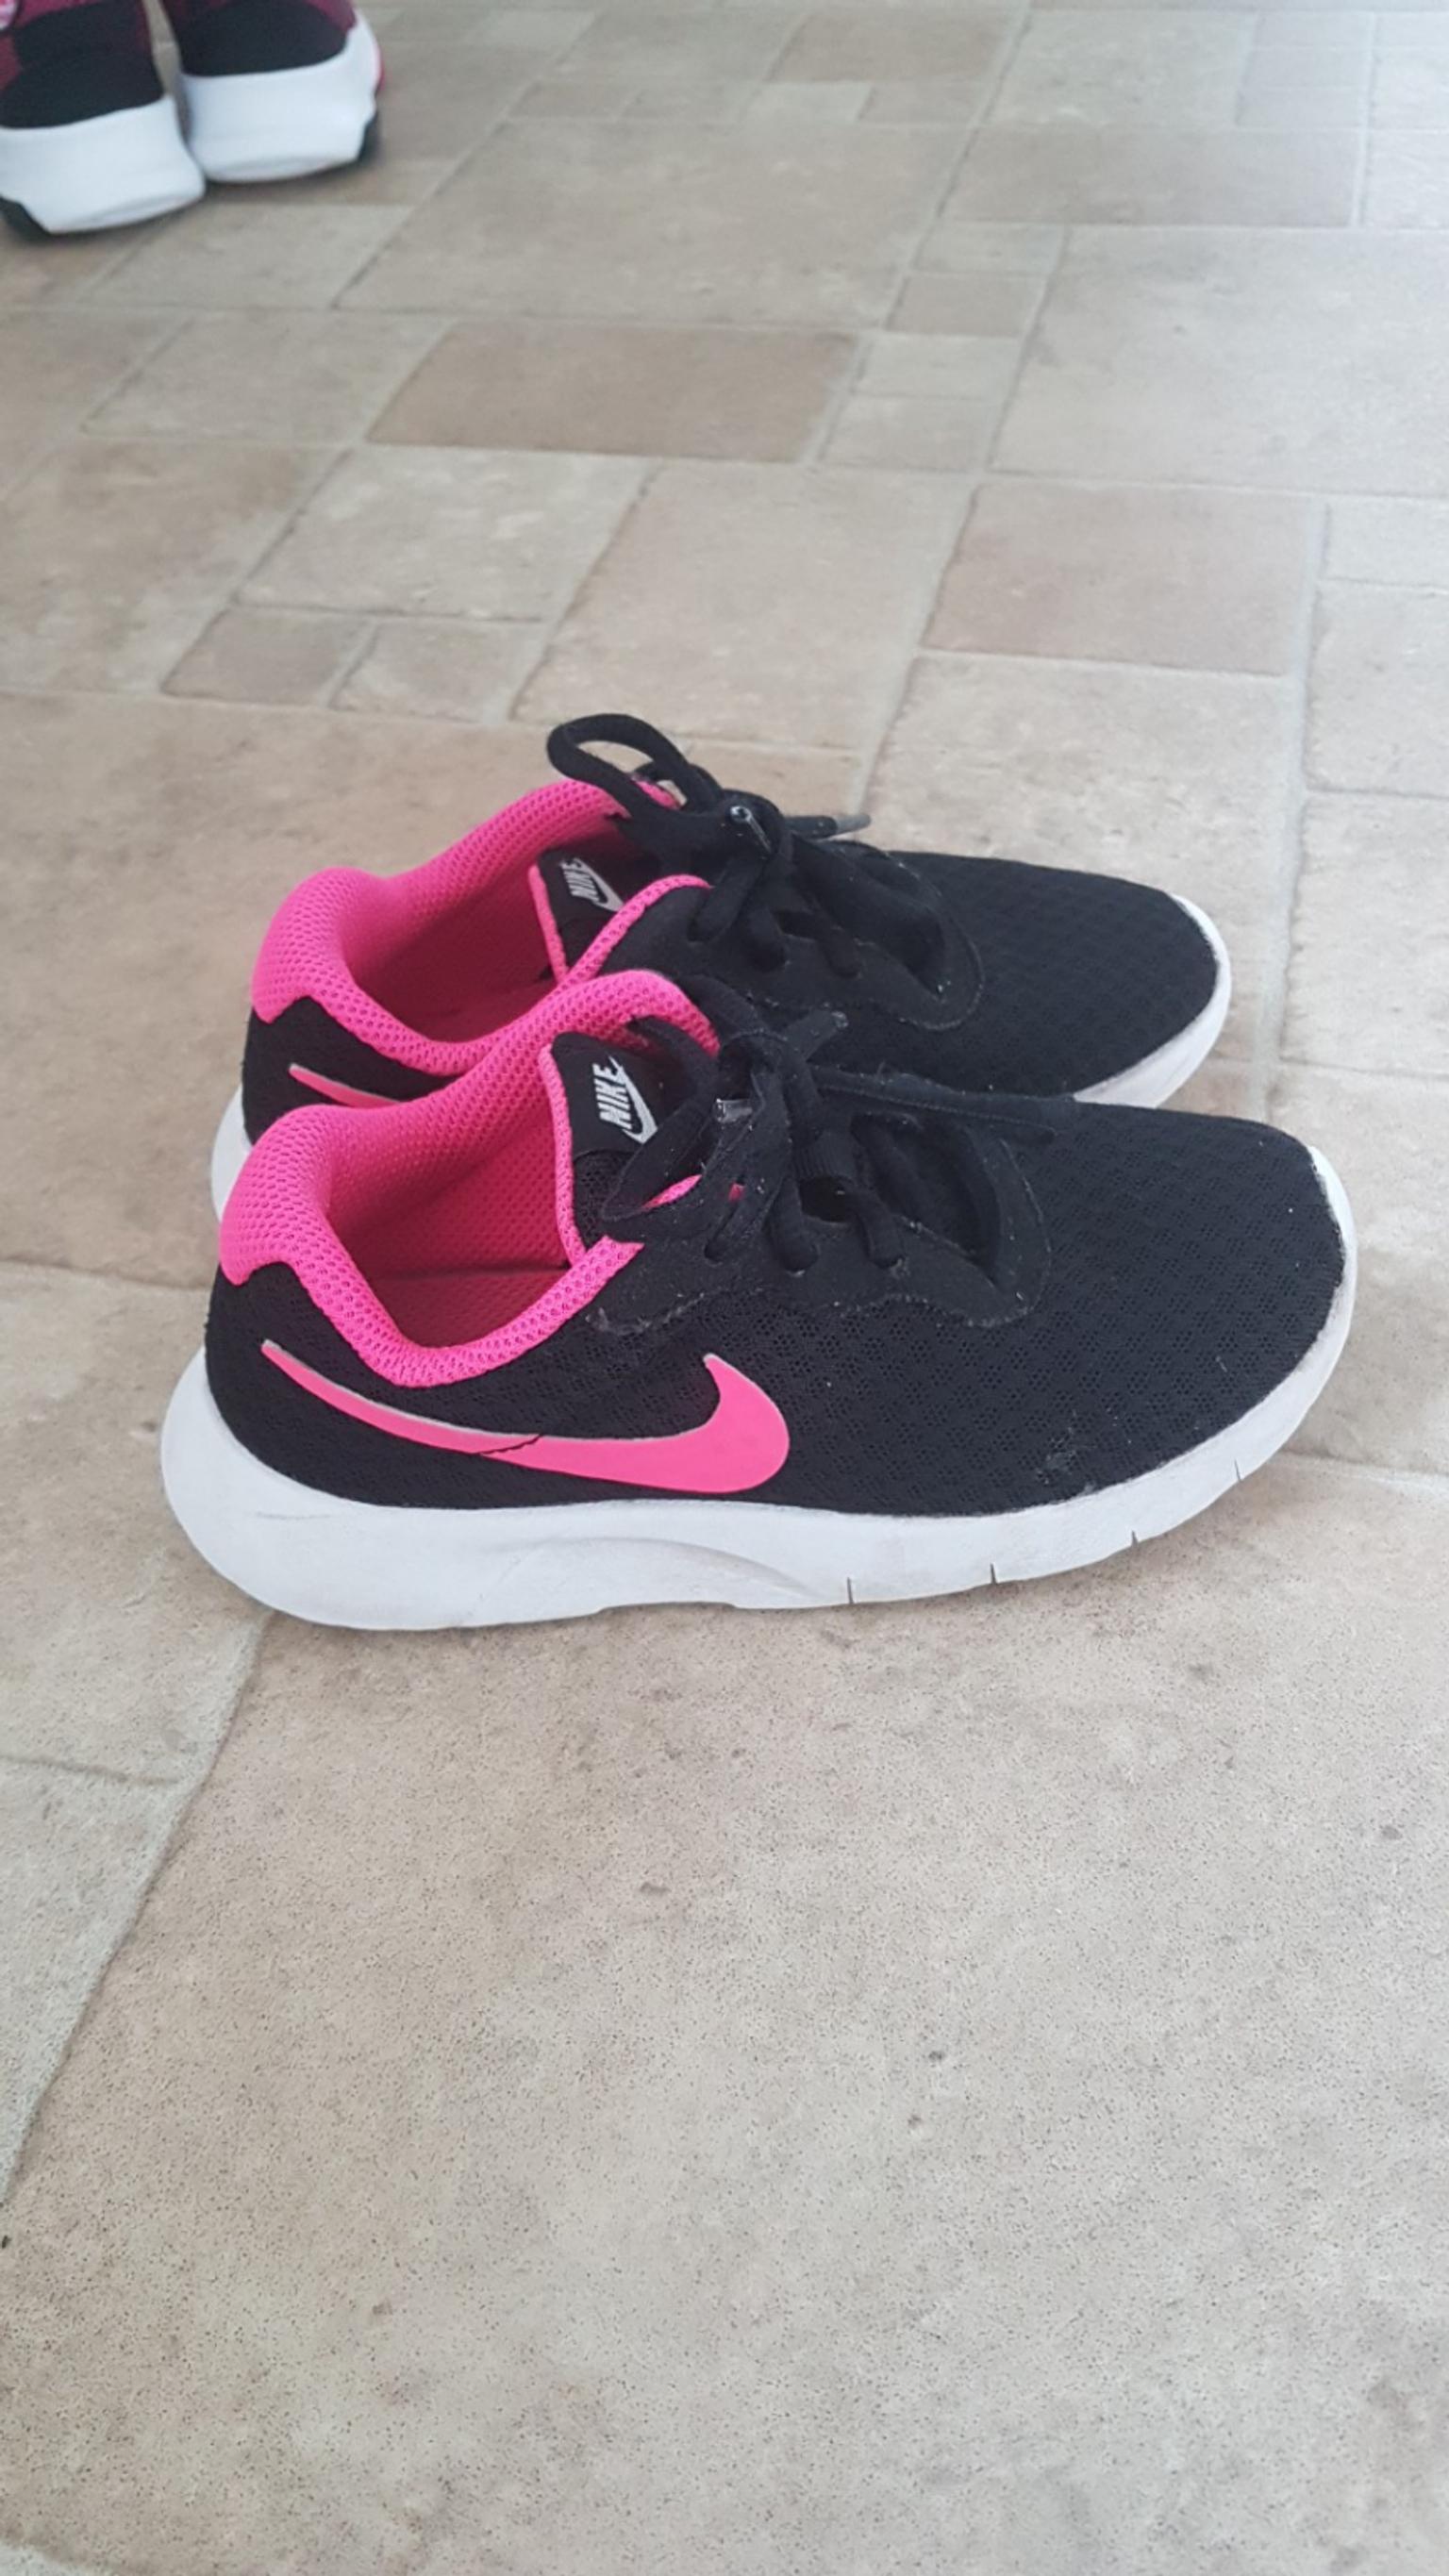 Nike girls trainers size 11 in M32 